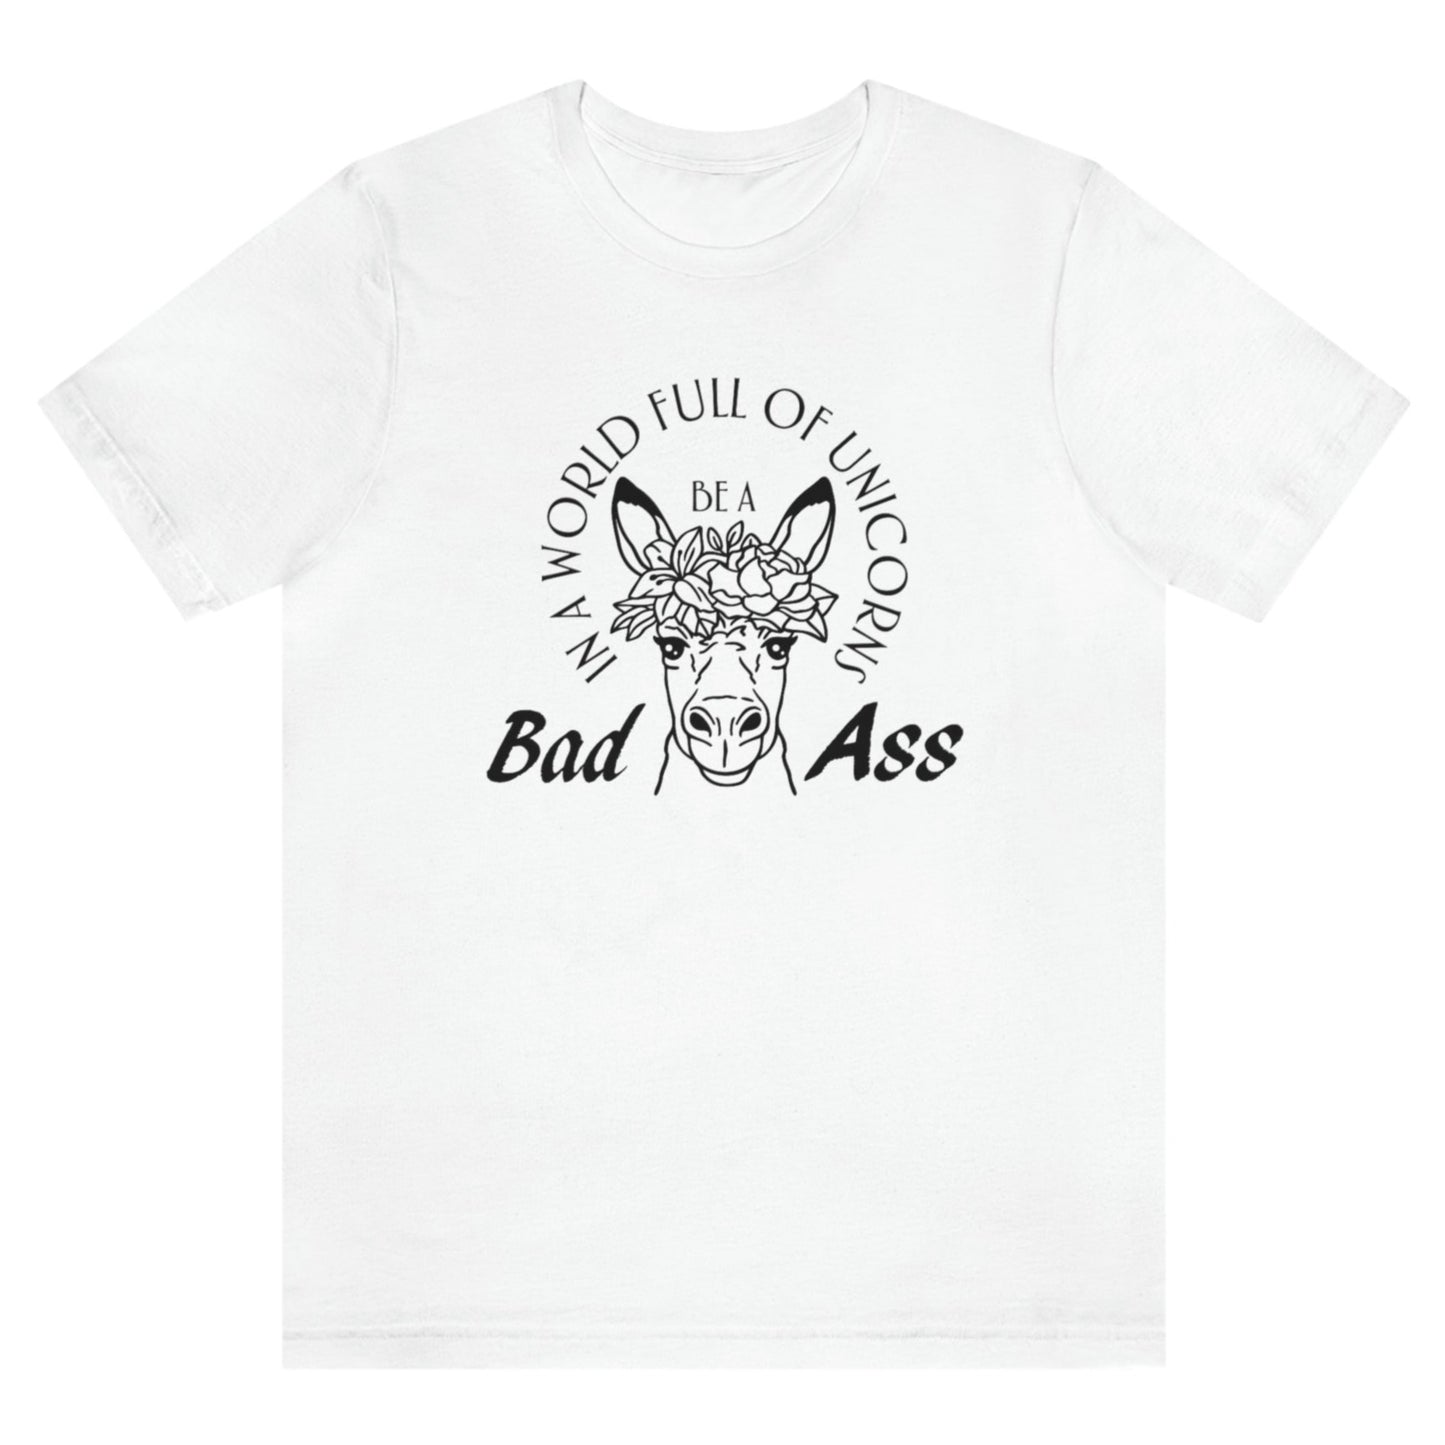 in-a-world-full-of-unicorns-be-a-bad-ass-white-t-shirt-womens-funny-donkey